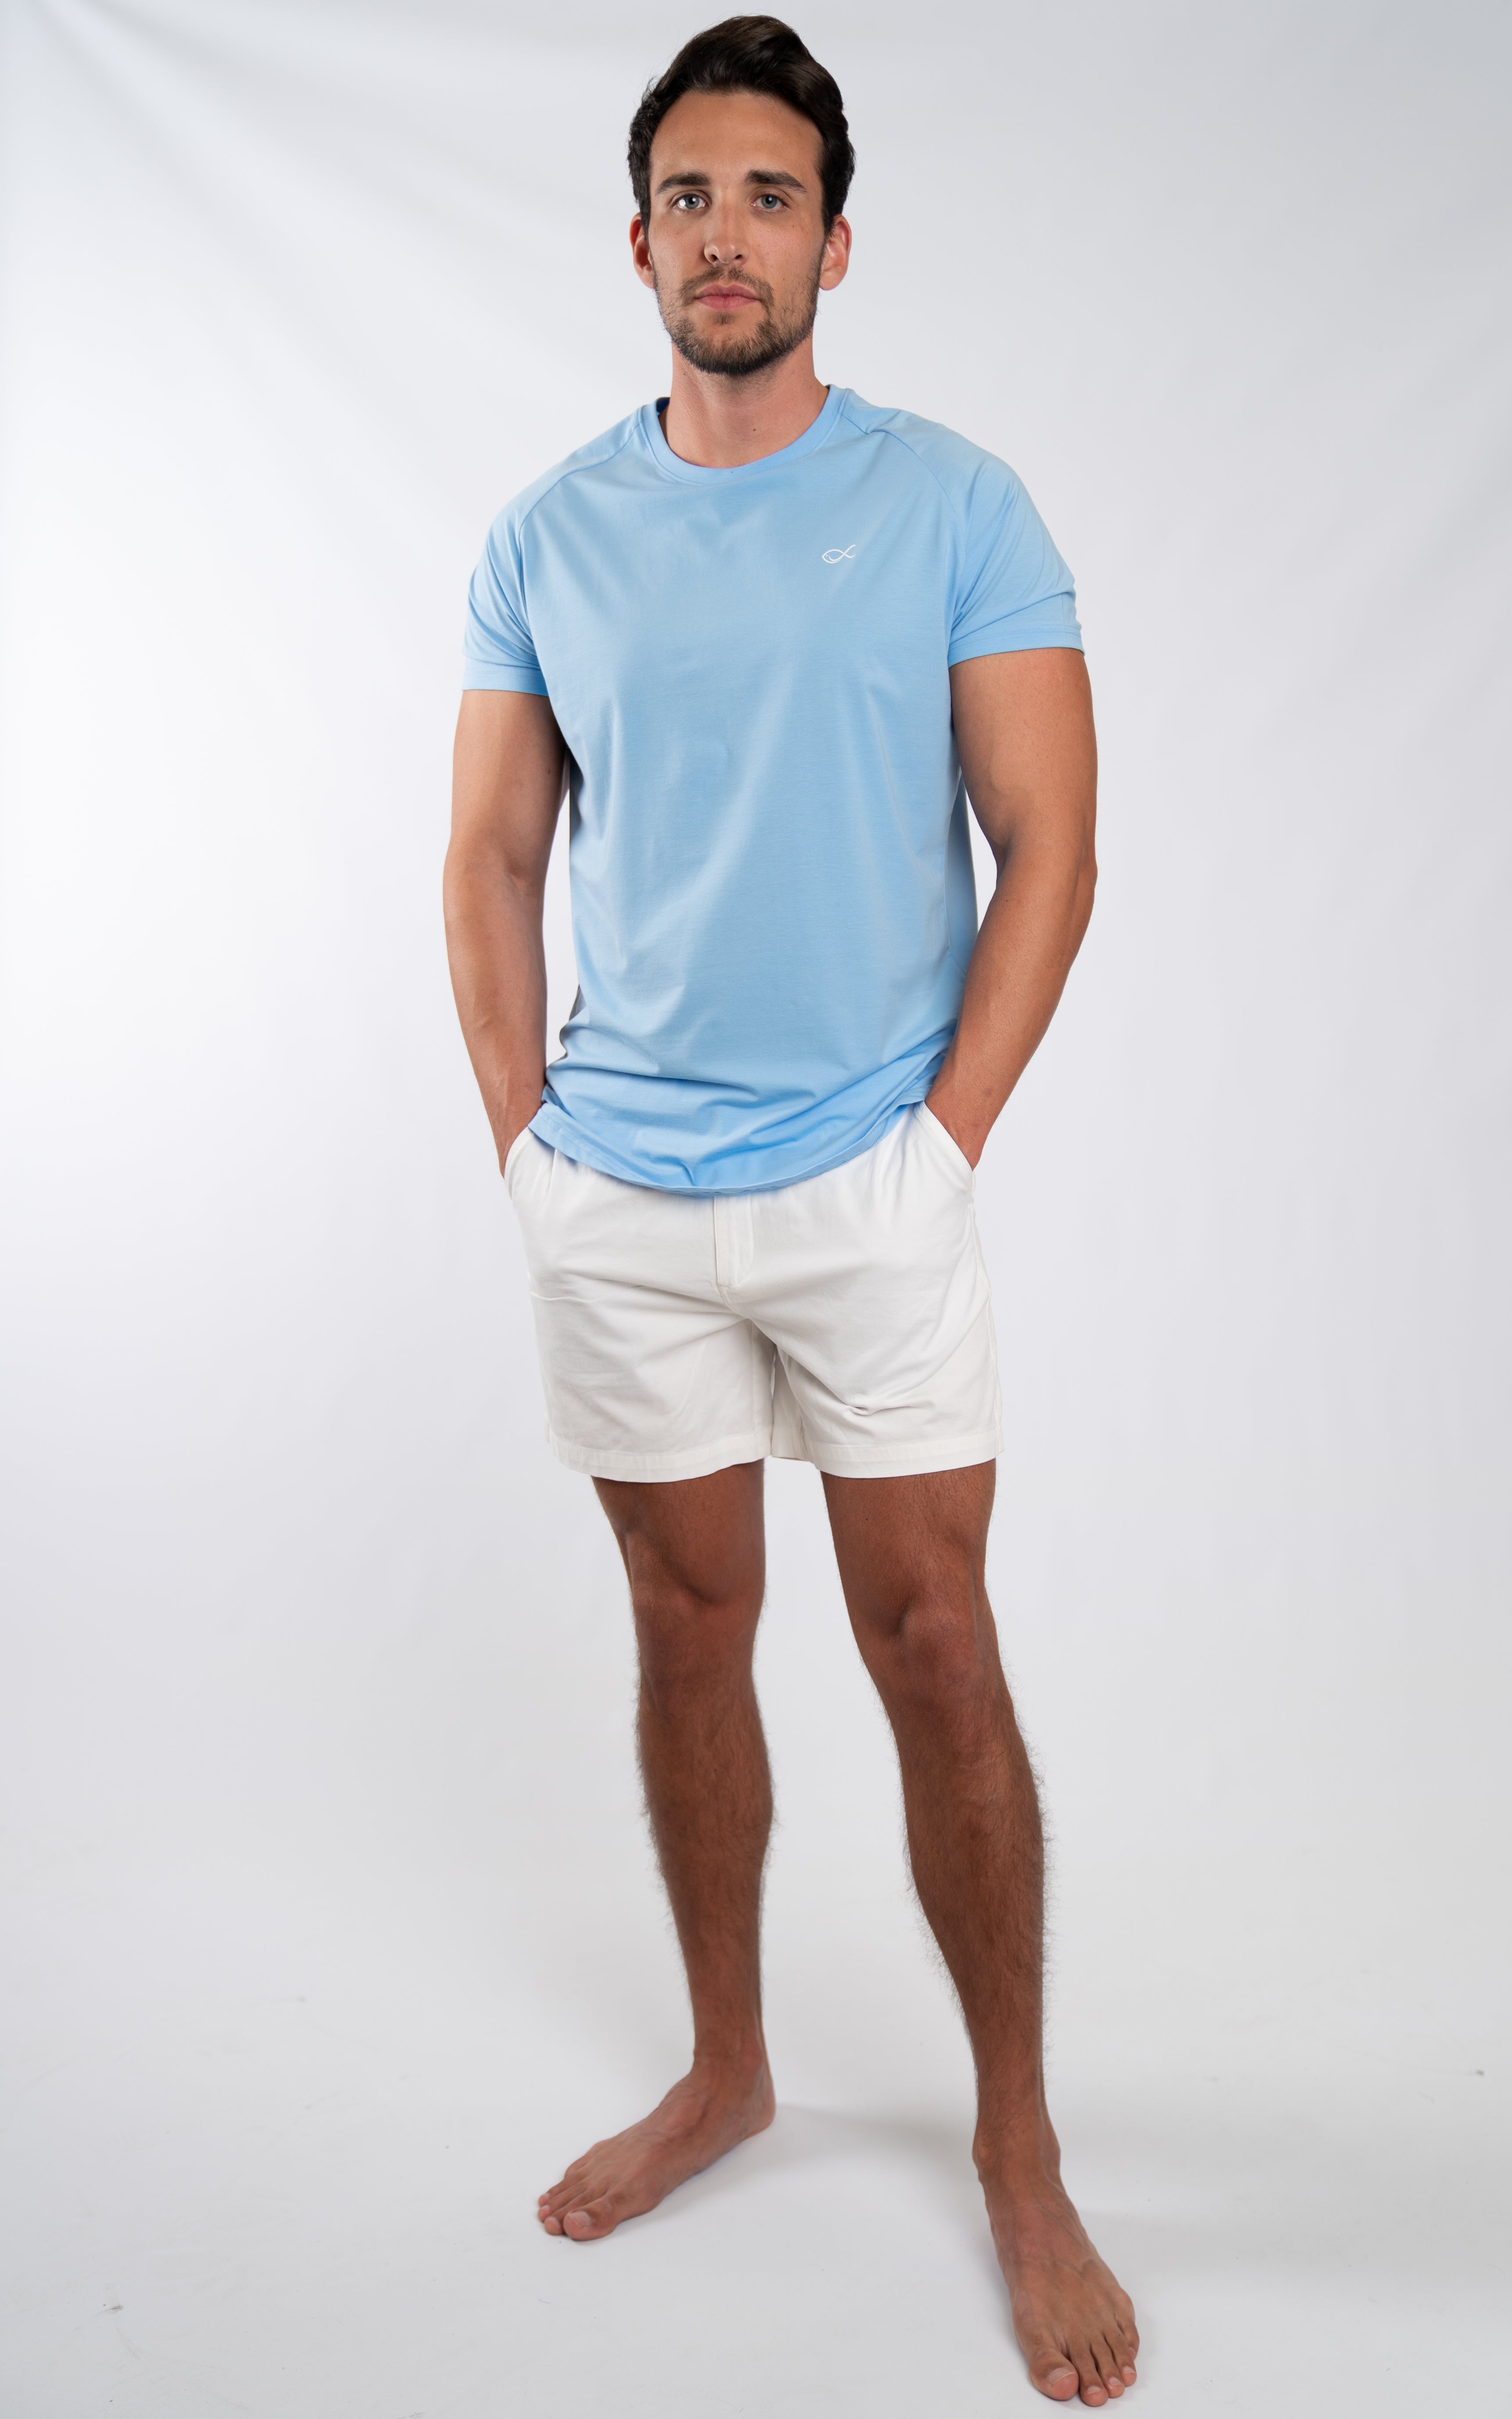 Men's Comfort Tee in Airy Blue - Southern Athletica